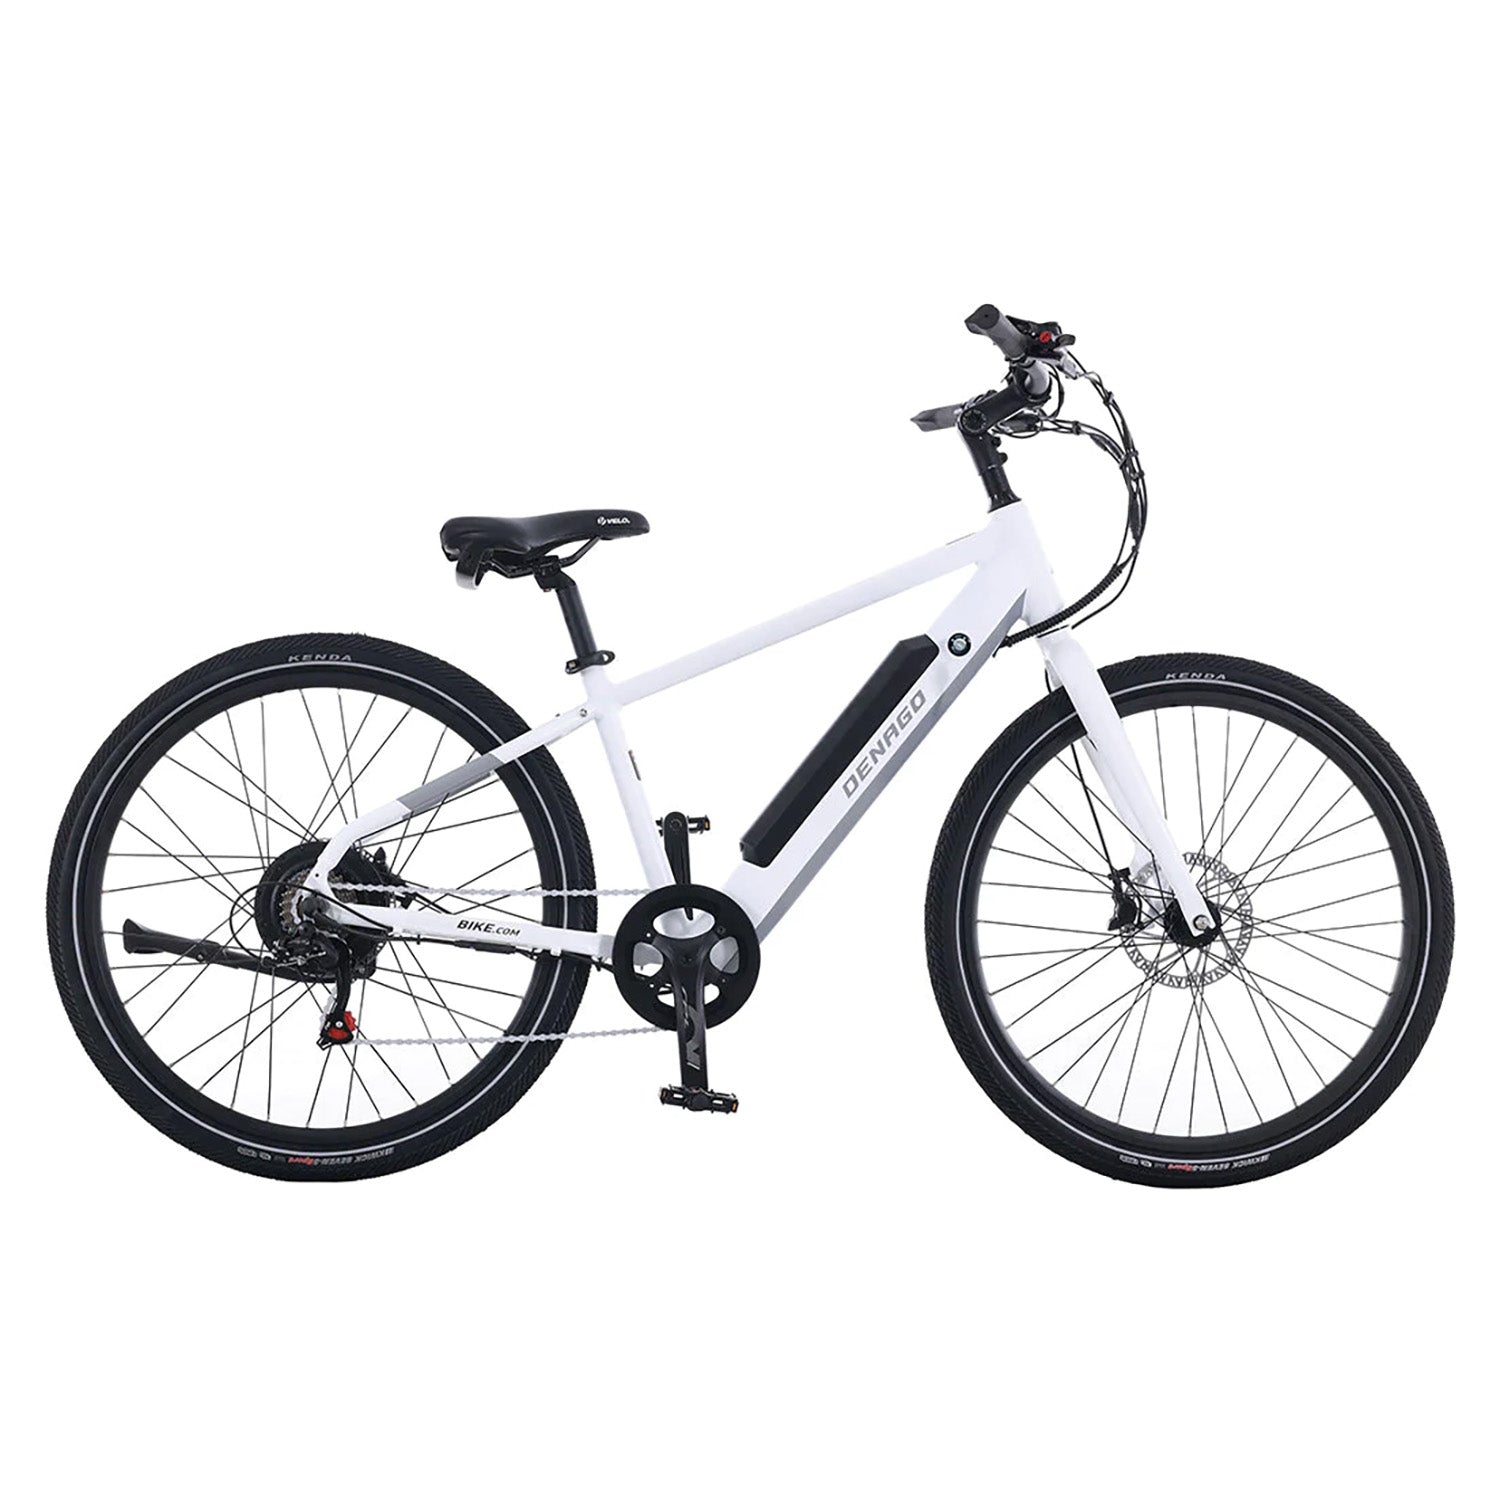 Raffle Tickets to Support Team Suicide Prevention - Denago City Model Top Tube e-bike, Bixby Bicycles, OK